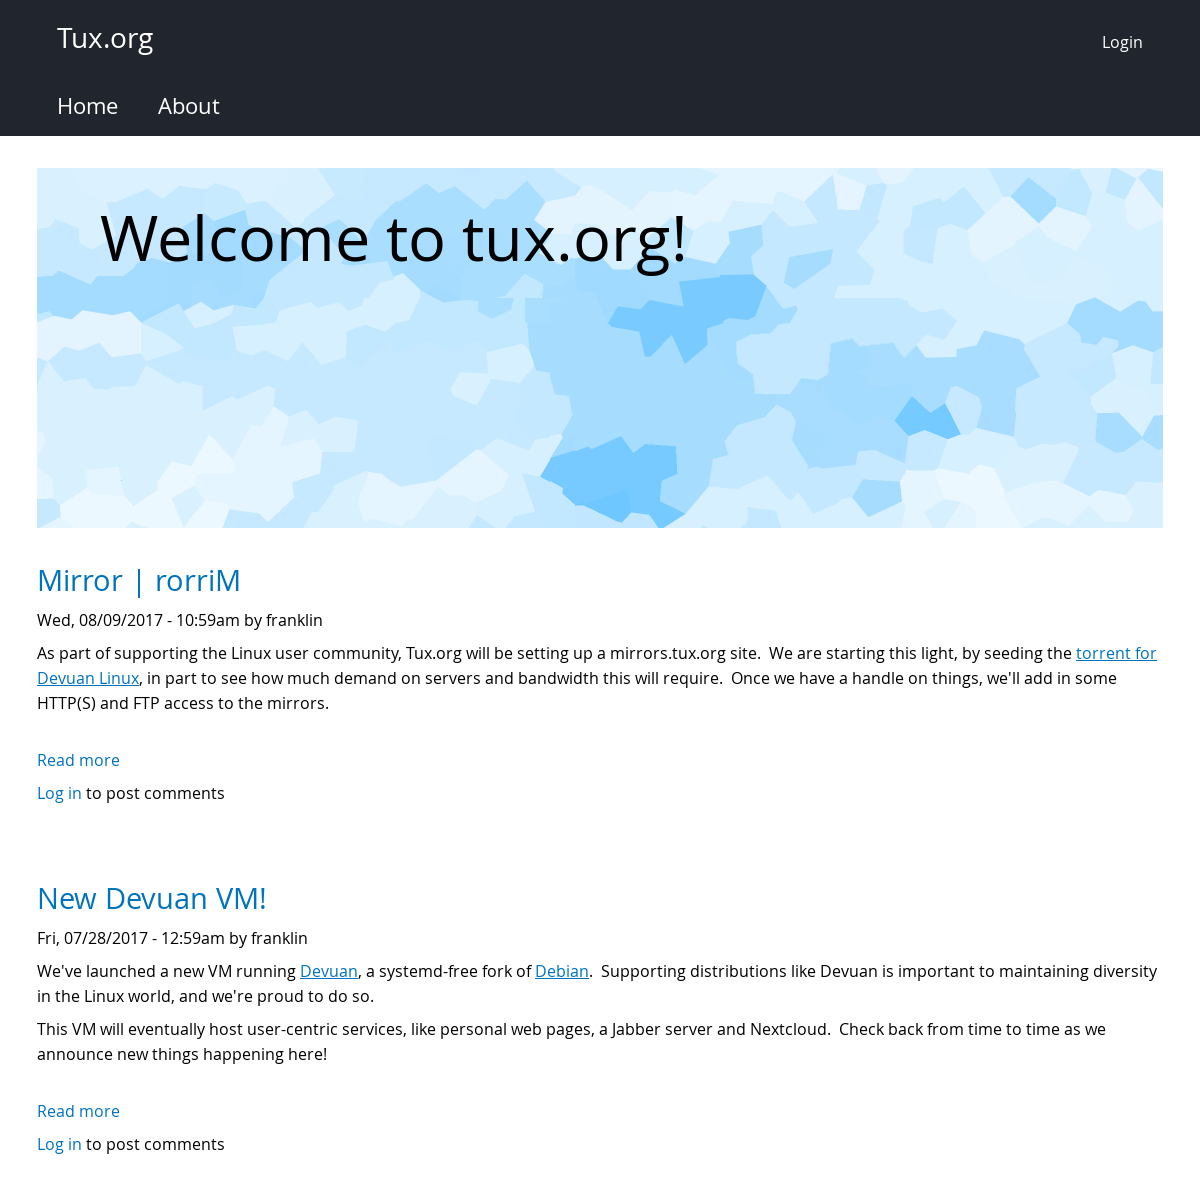 A complete backup of tux.org